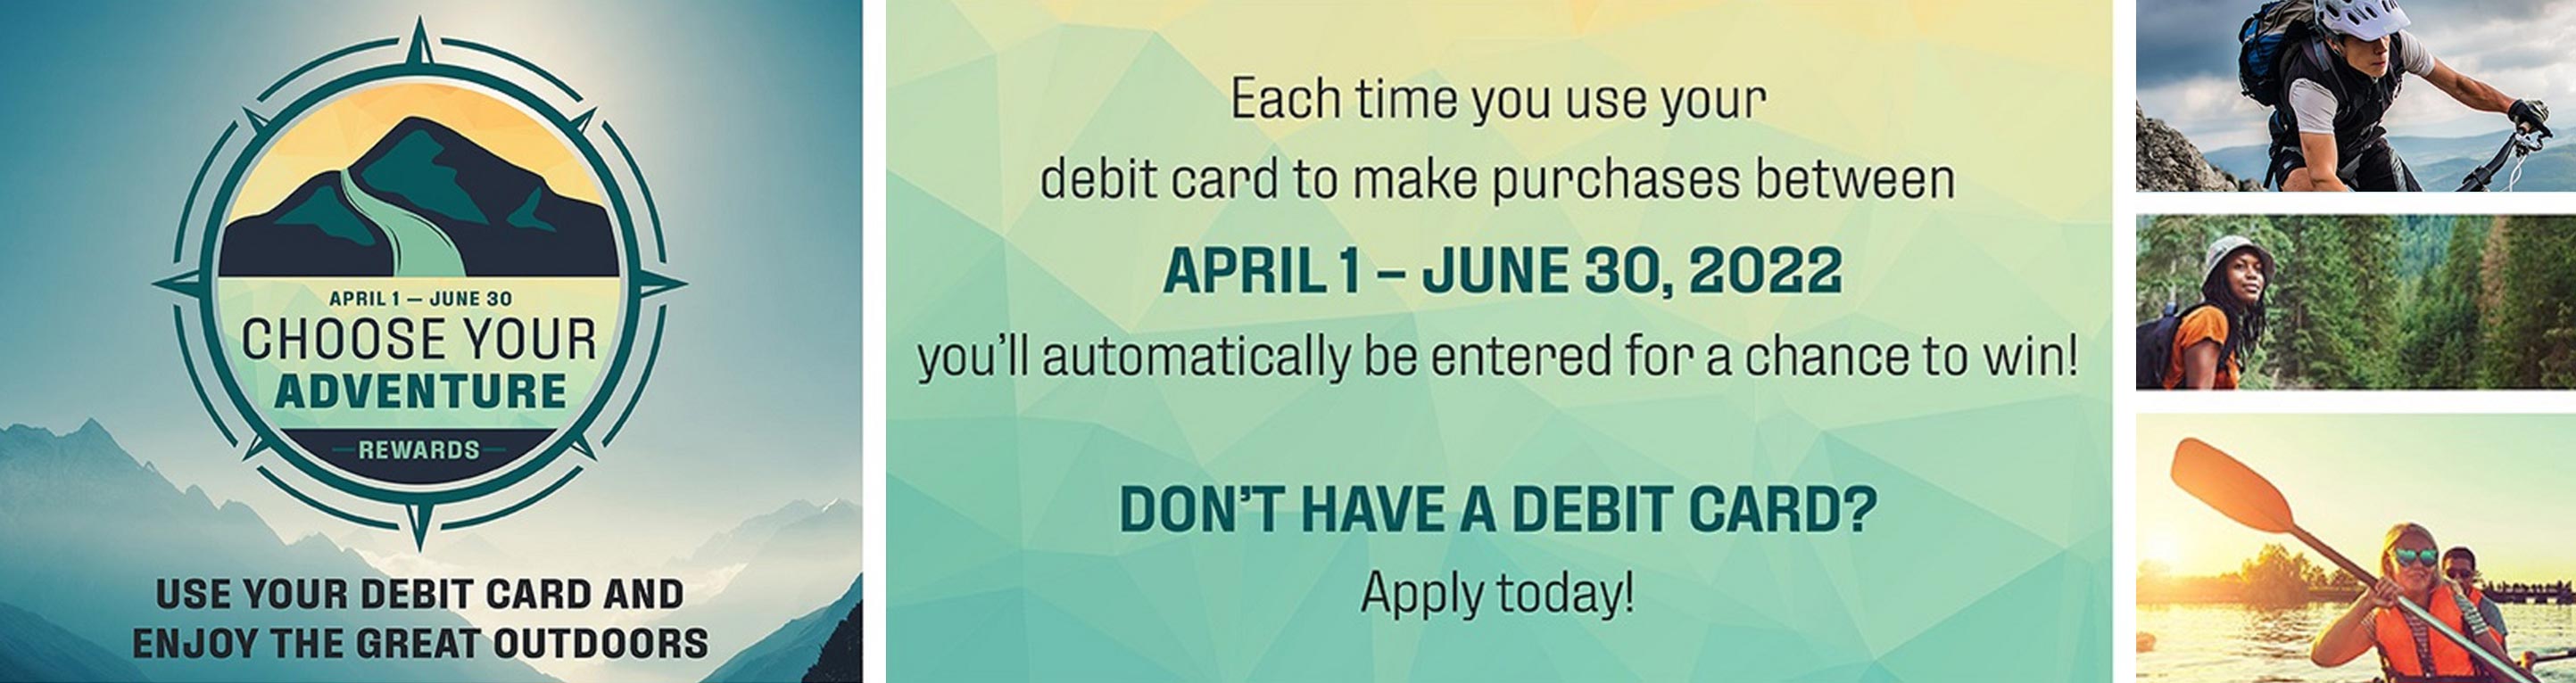 Choose your adventure rewards. April 1 - June 30. Use your debit card and enjoy the great outdoors. Each time you use your debit card to make purchases between April 1 - June 30, 2022 you'll be entered to win. Don't have a debit card? Apply today